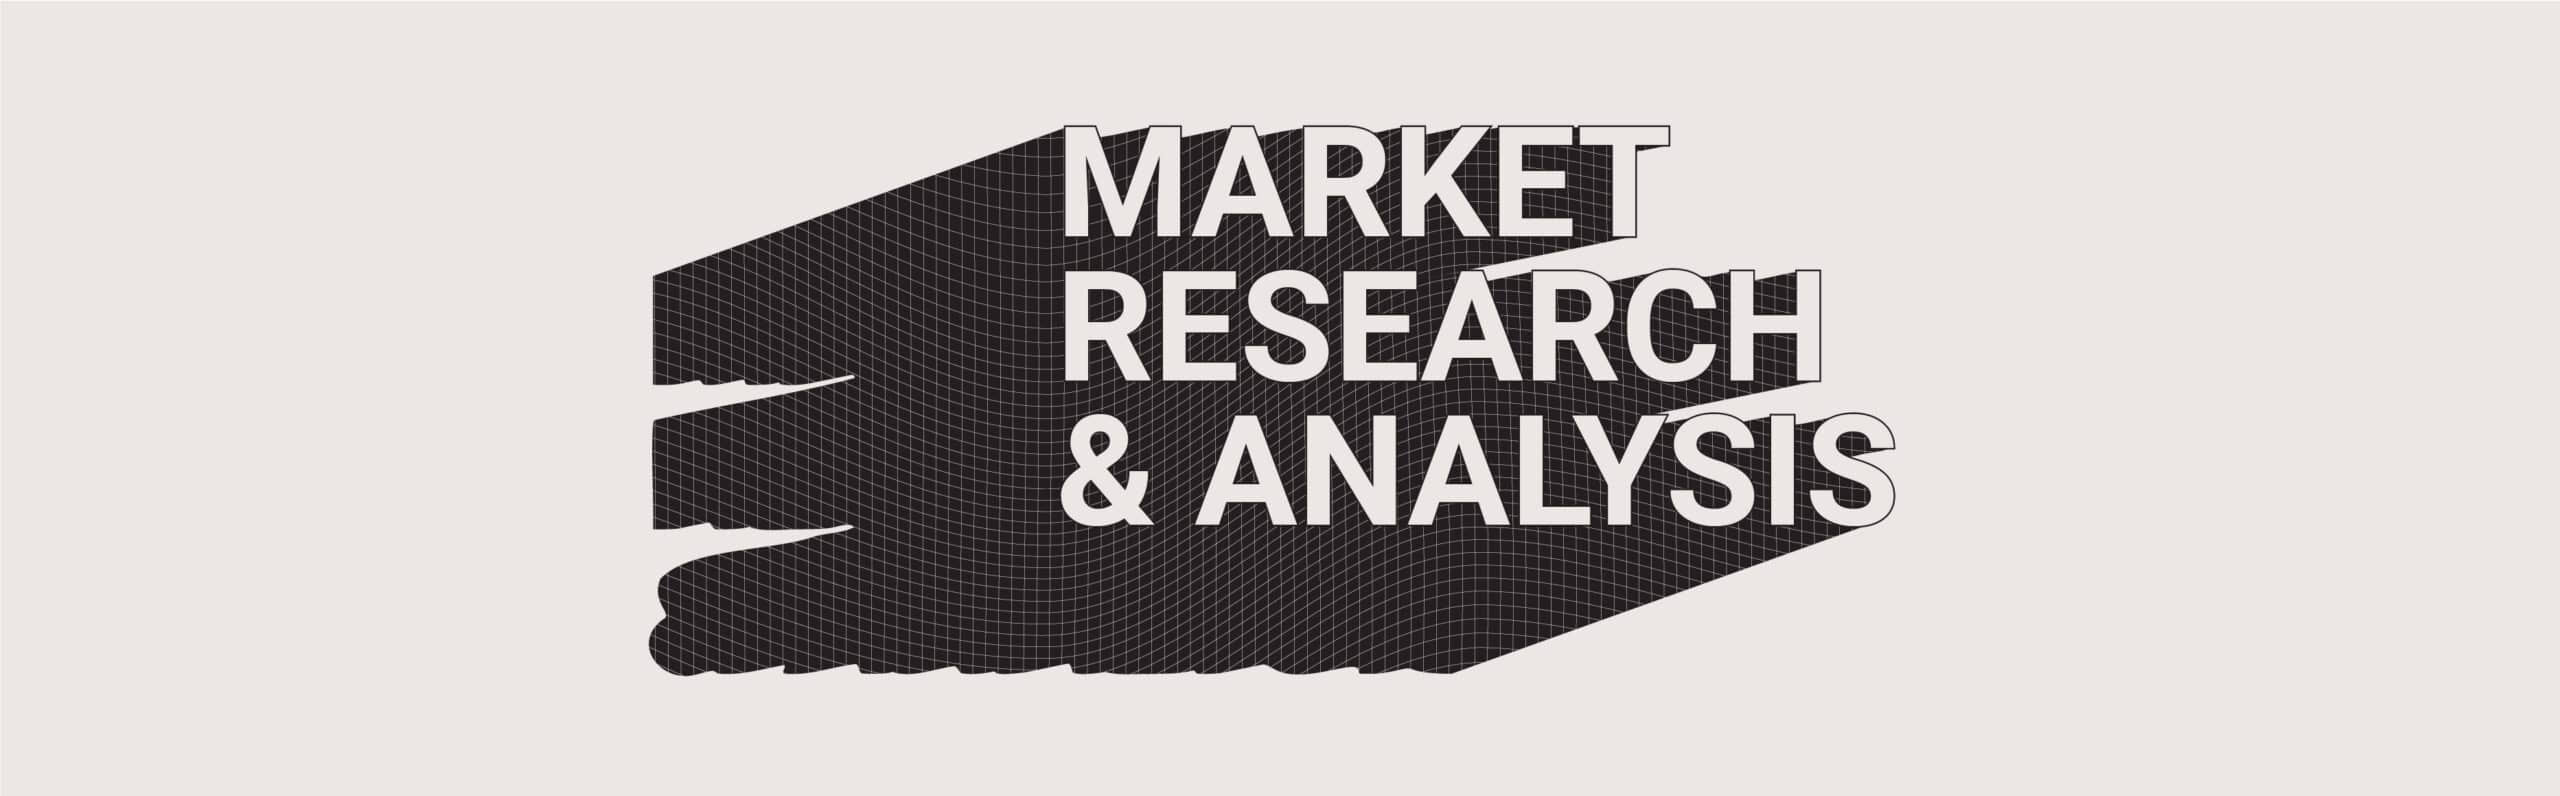 Market Research and Analysis for Effective Marketing Development - Astute Communications